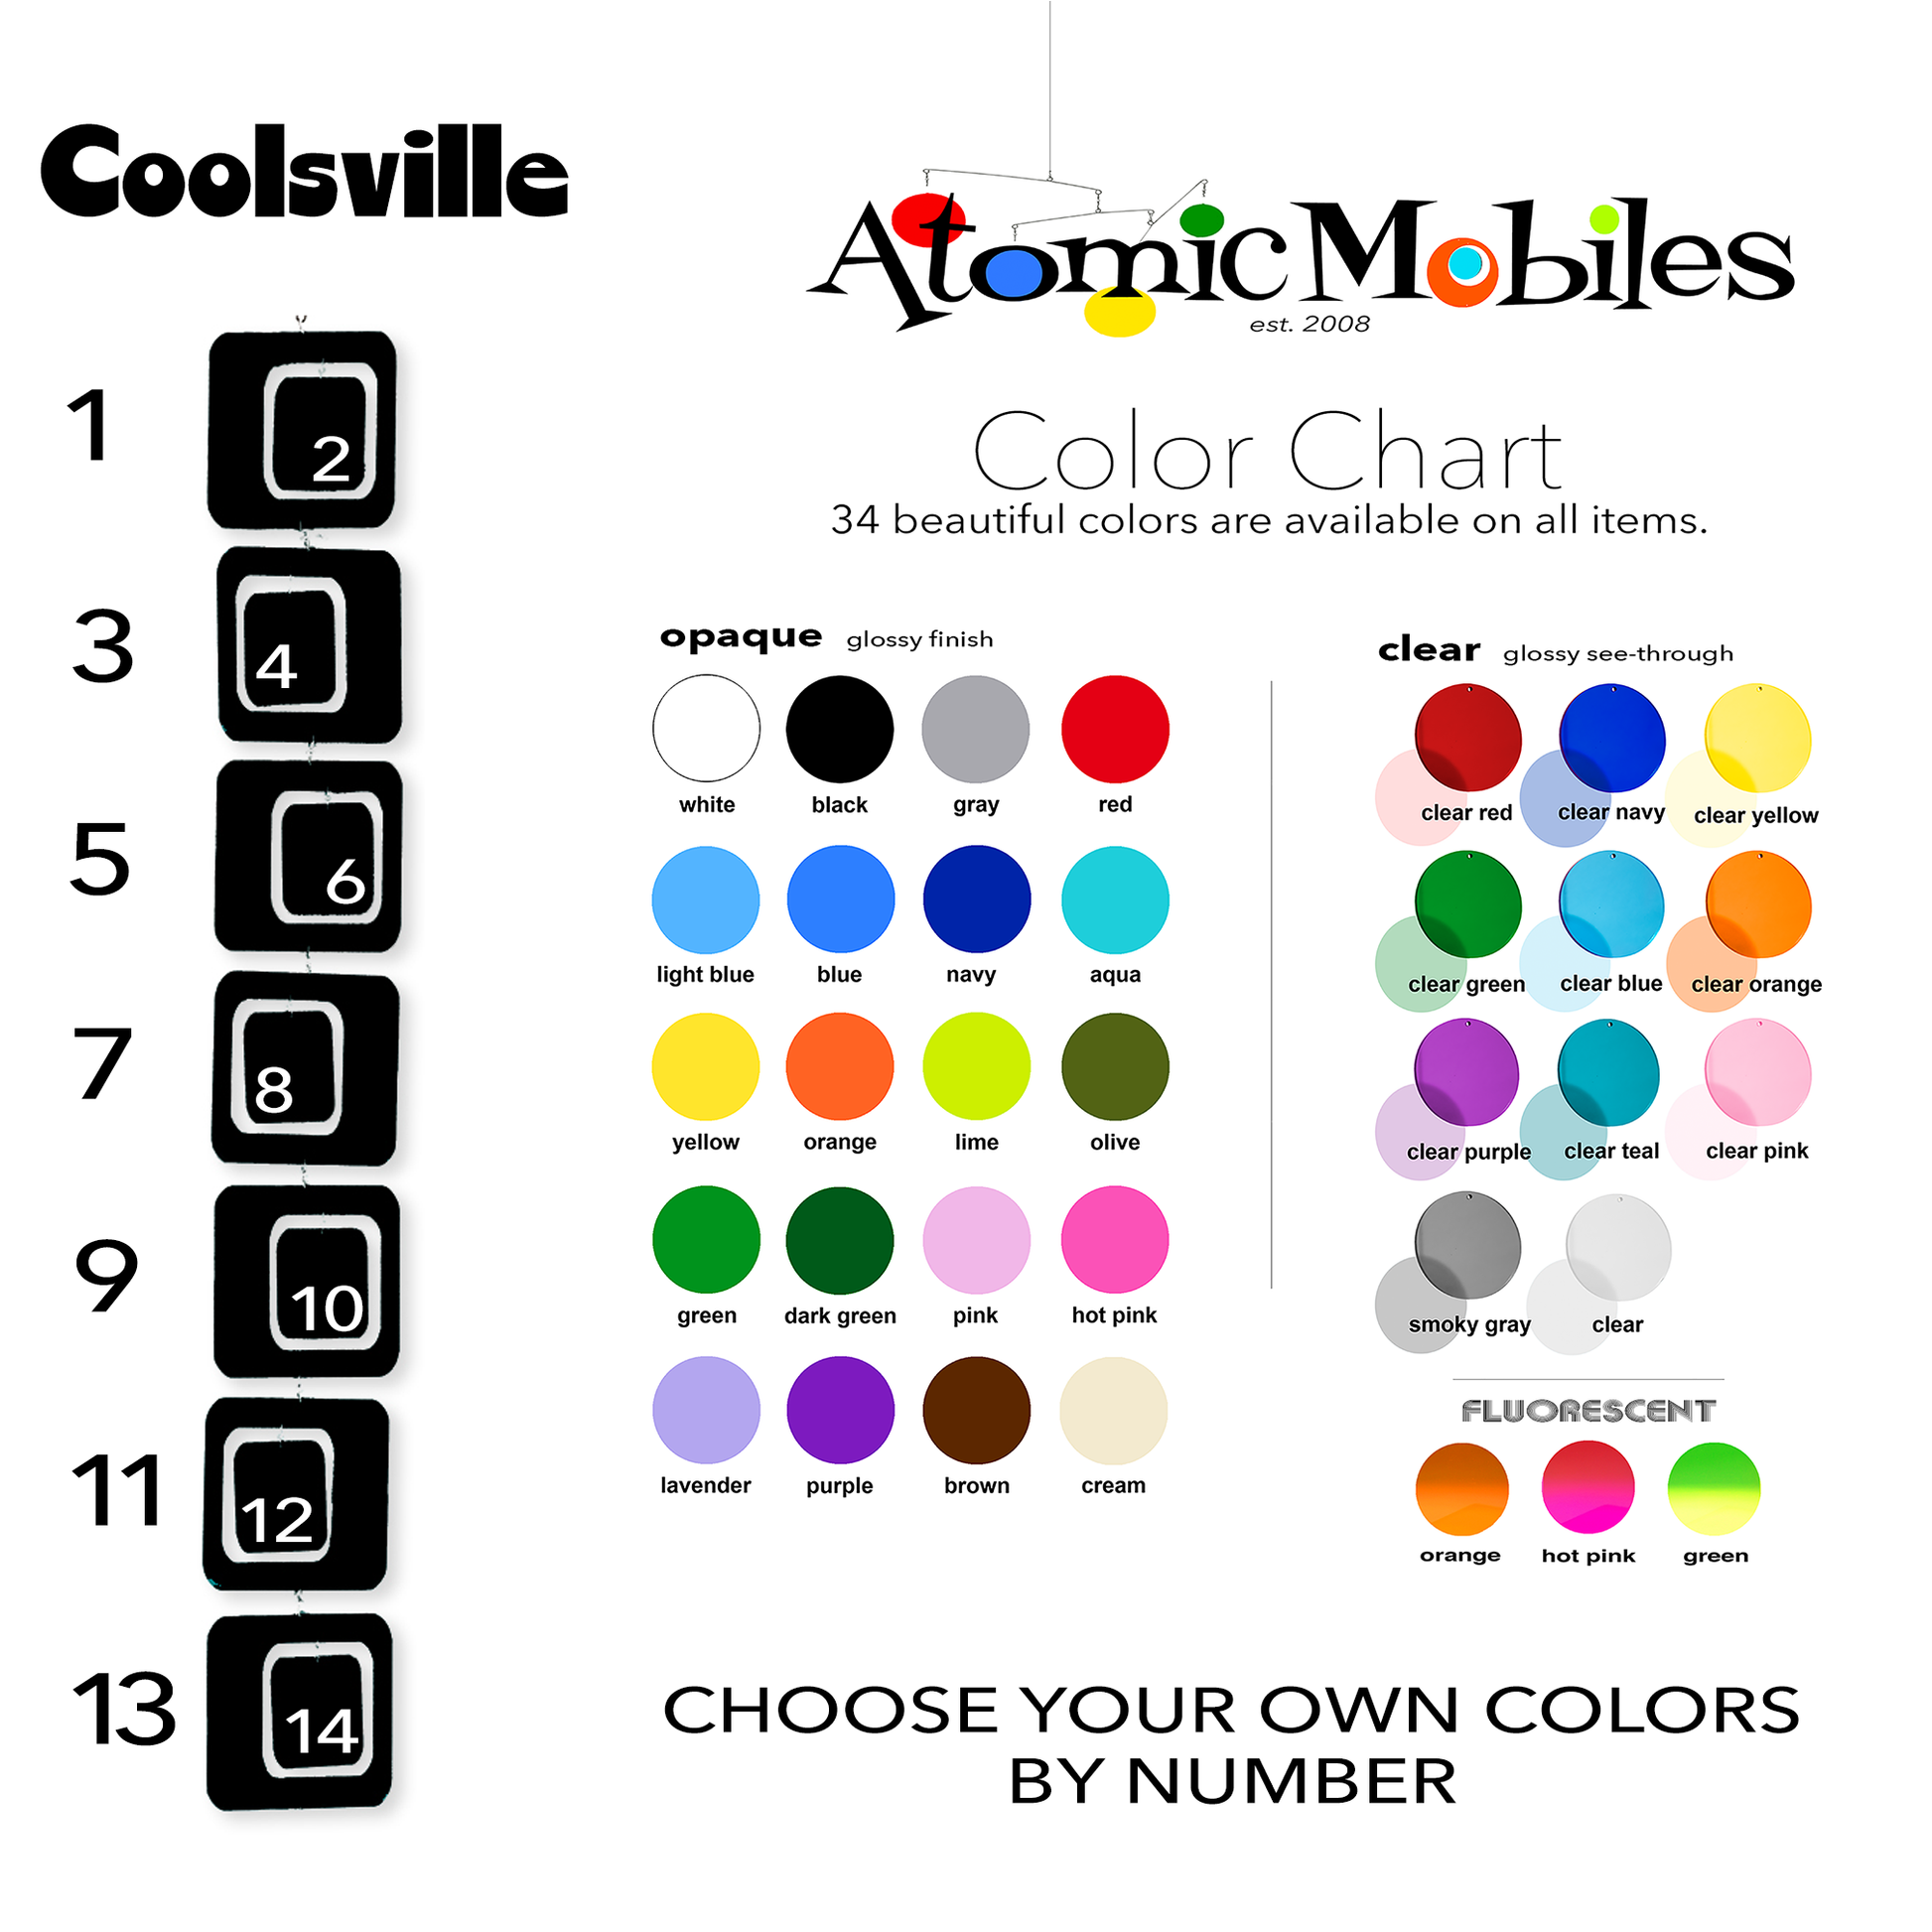 Color Chart for Coolsville Vertical Hanging Art Mobiles by AtomicMobiles.com